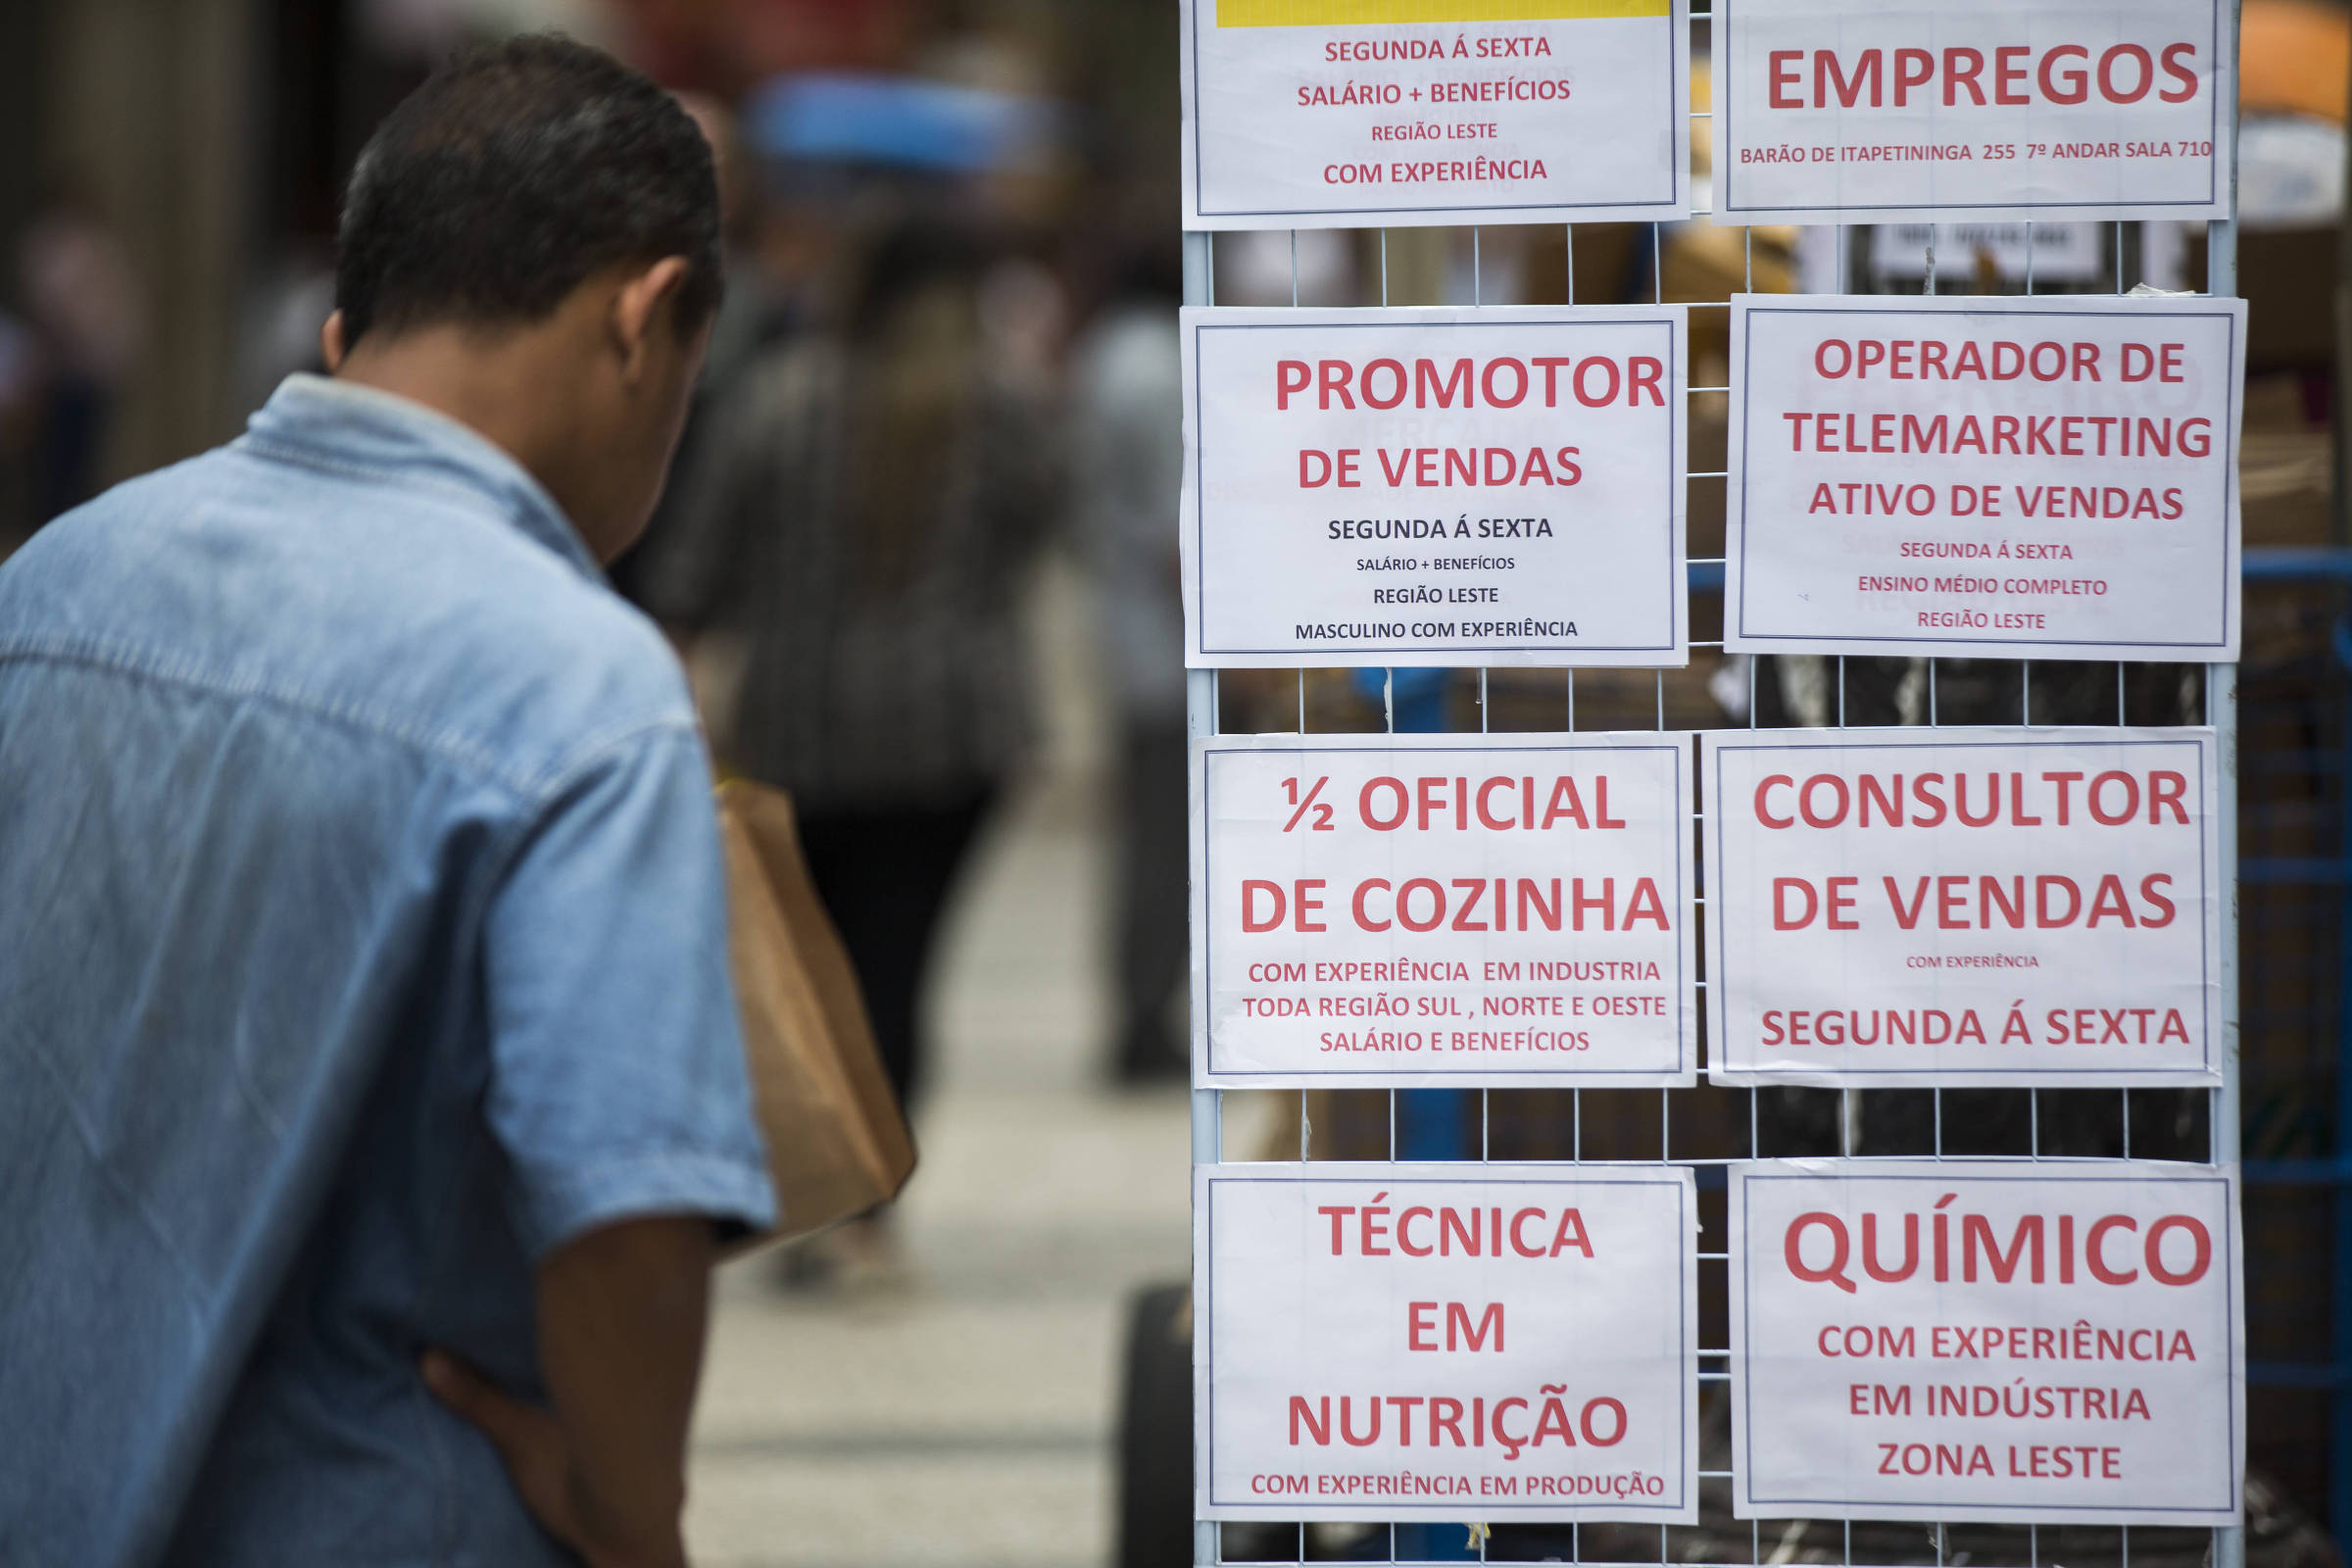 Currently, there are 12.5 million unemployed in Brazil.